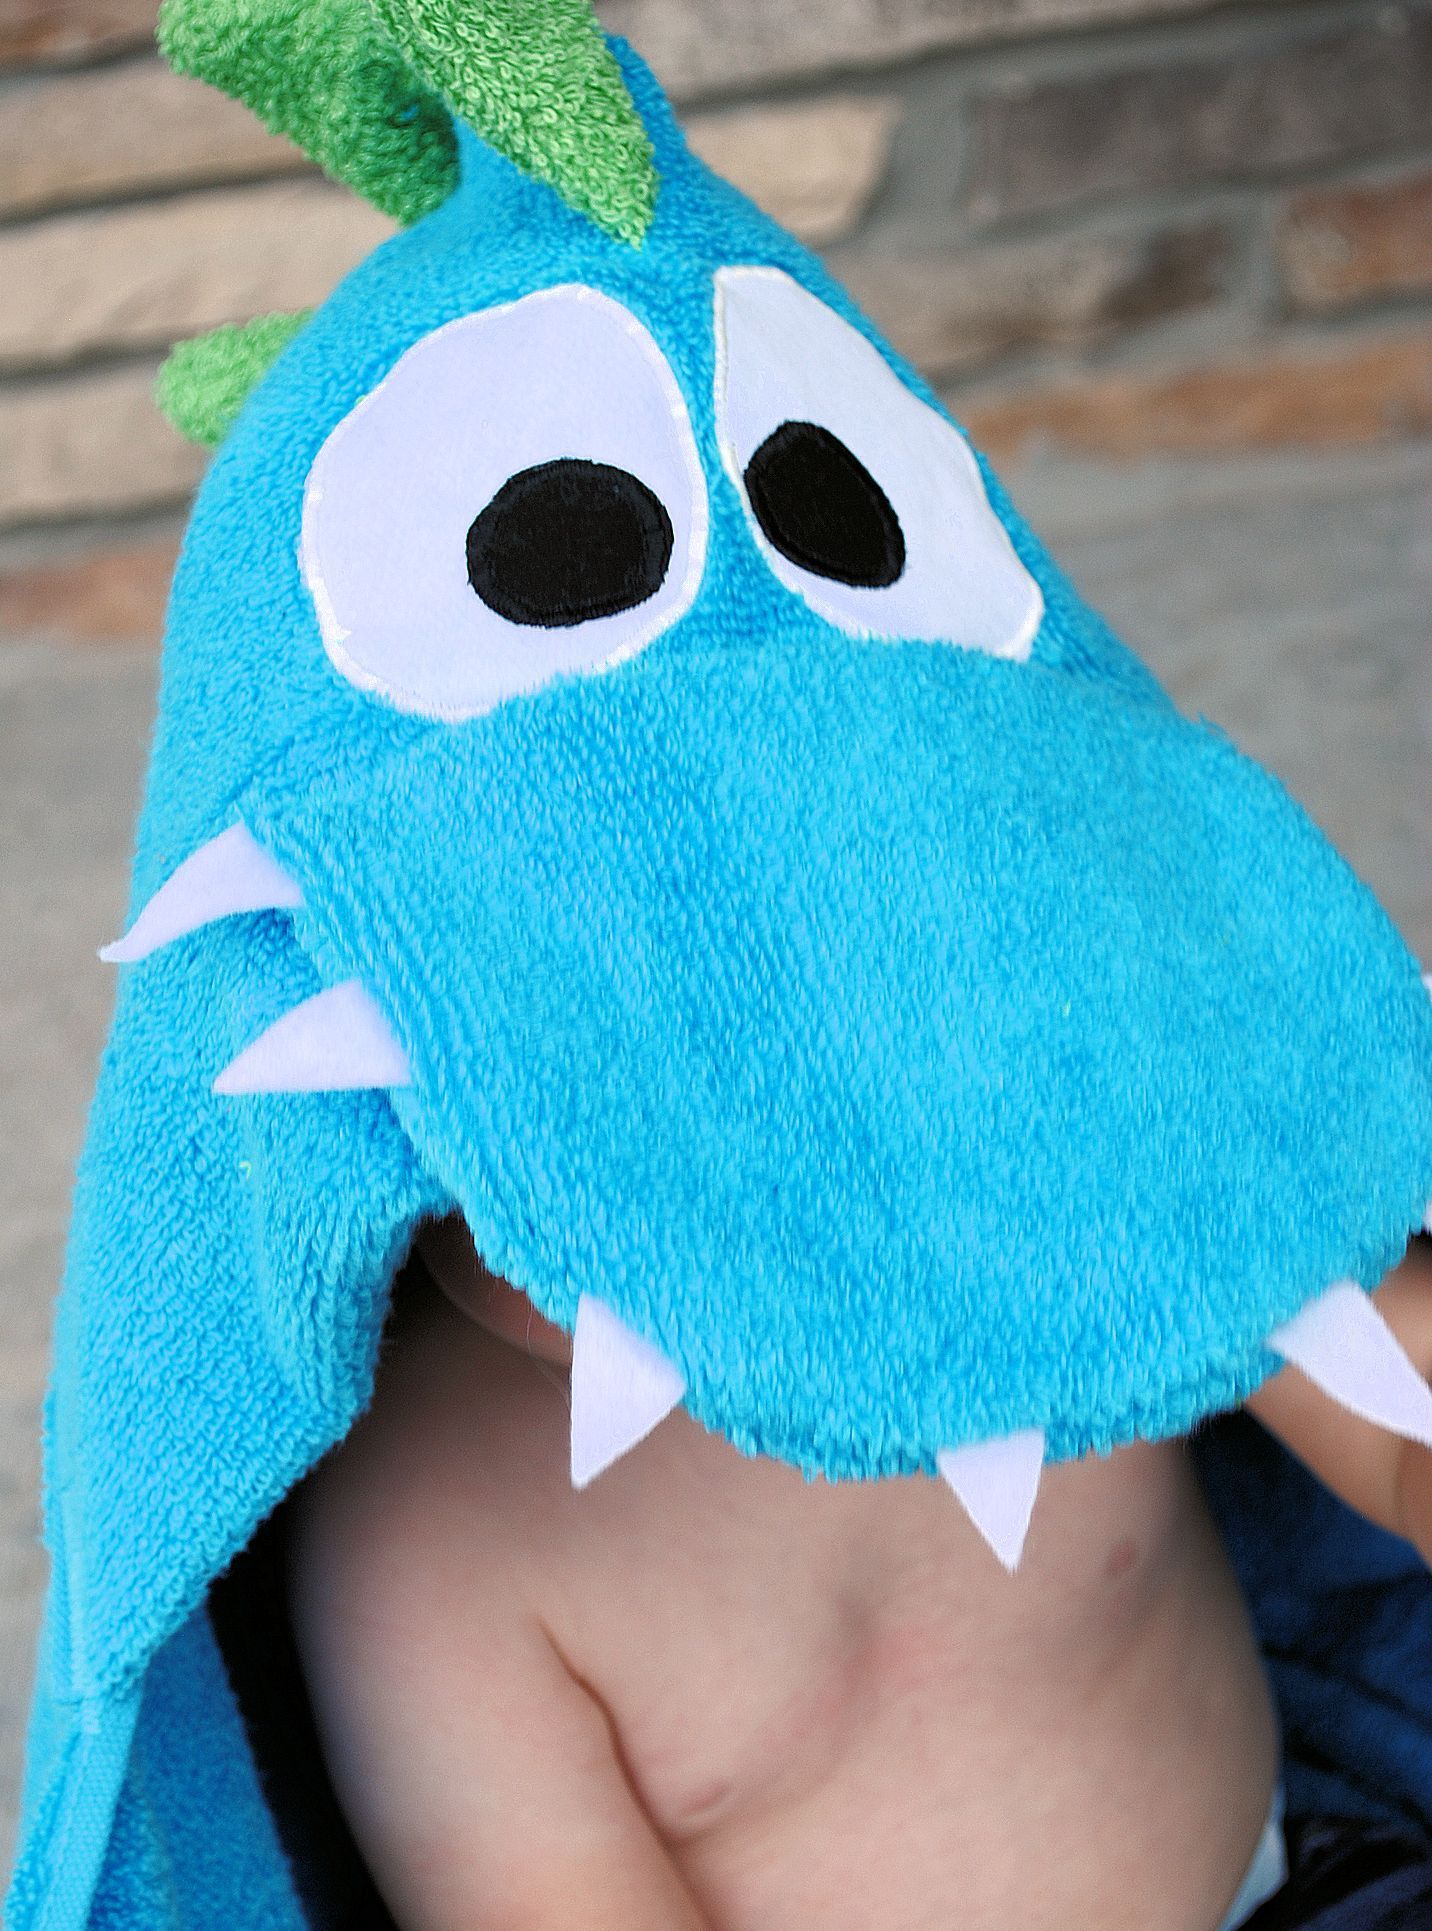 Dragon Hooded Towel – I know a couple little boys who need this! These are adorable and so easy to throw together